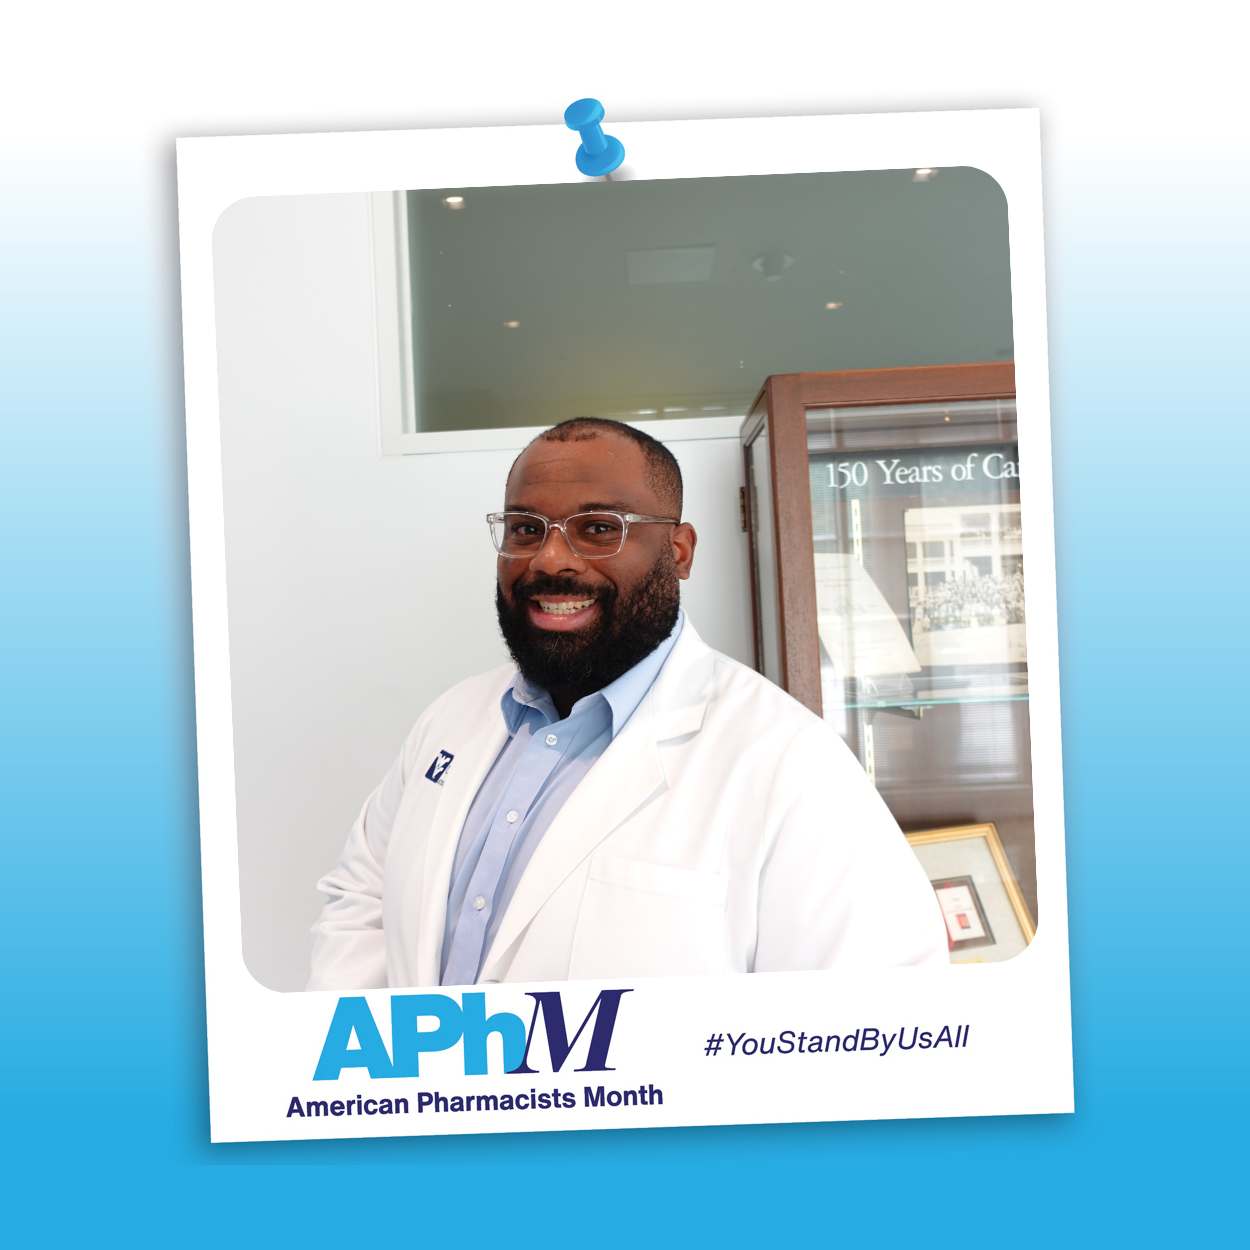 Share Your Appreciation, Share Moments and Memories, and Share the Love with #APhM2023, #pharmacistsmonth, #YouStandByUsAll, and #forpharmacy